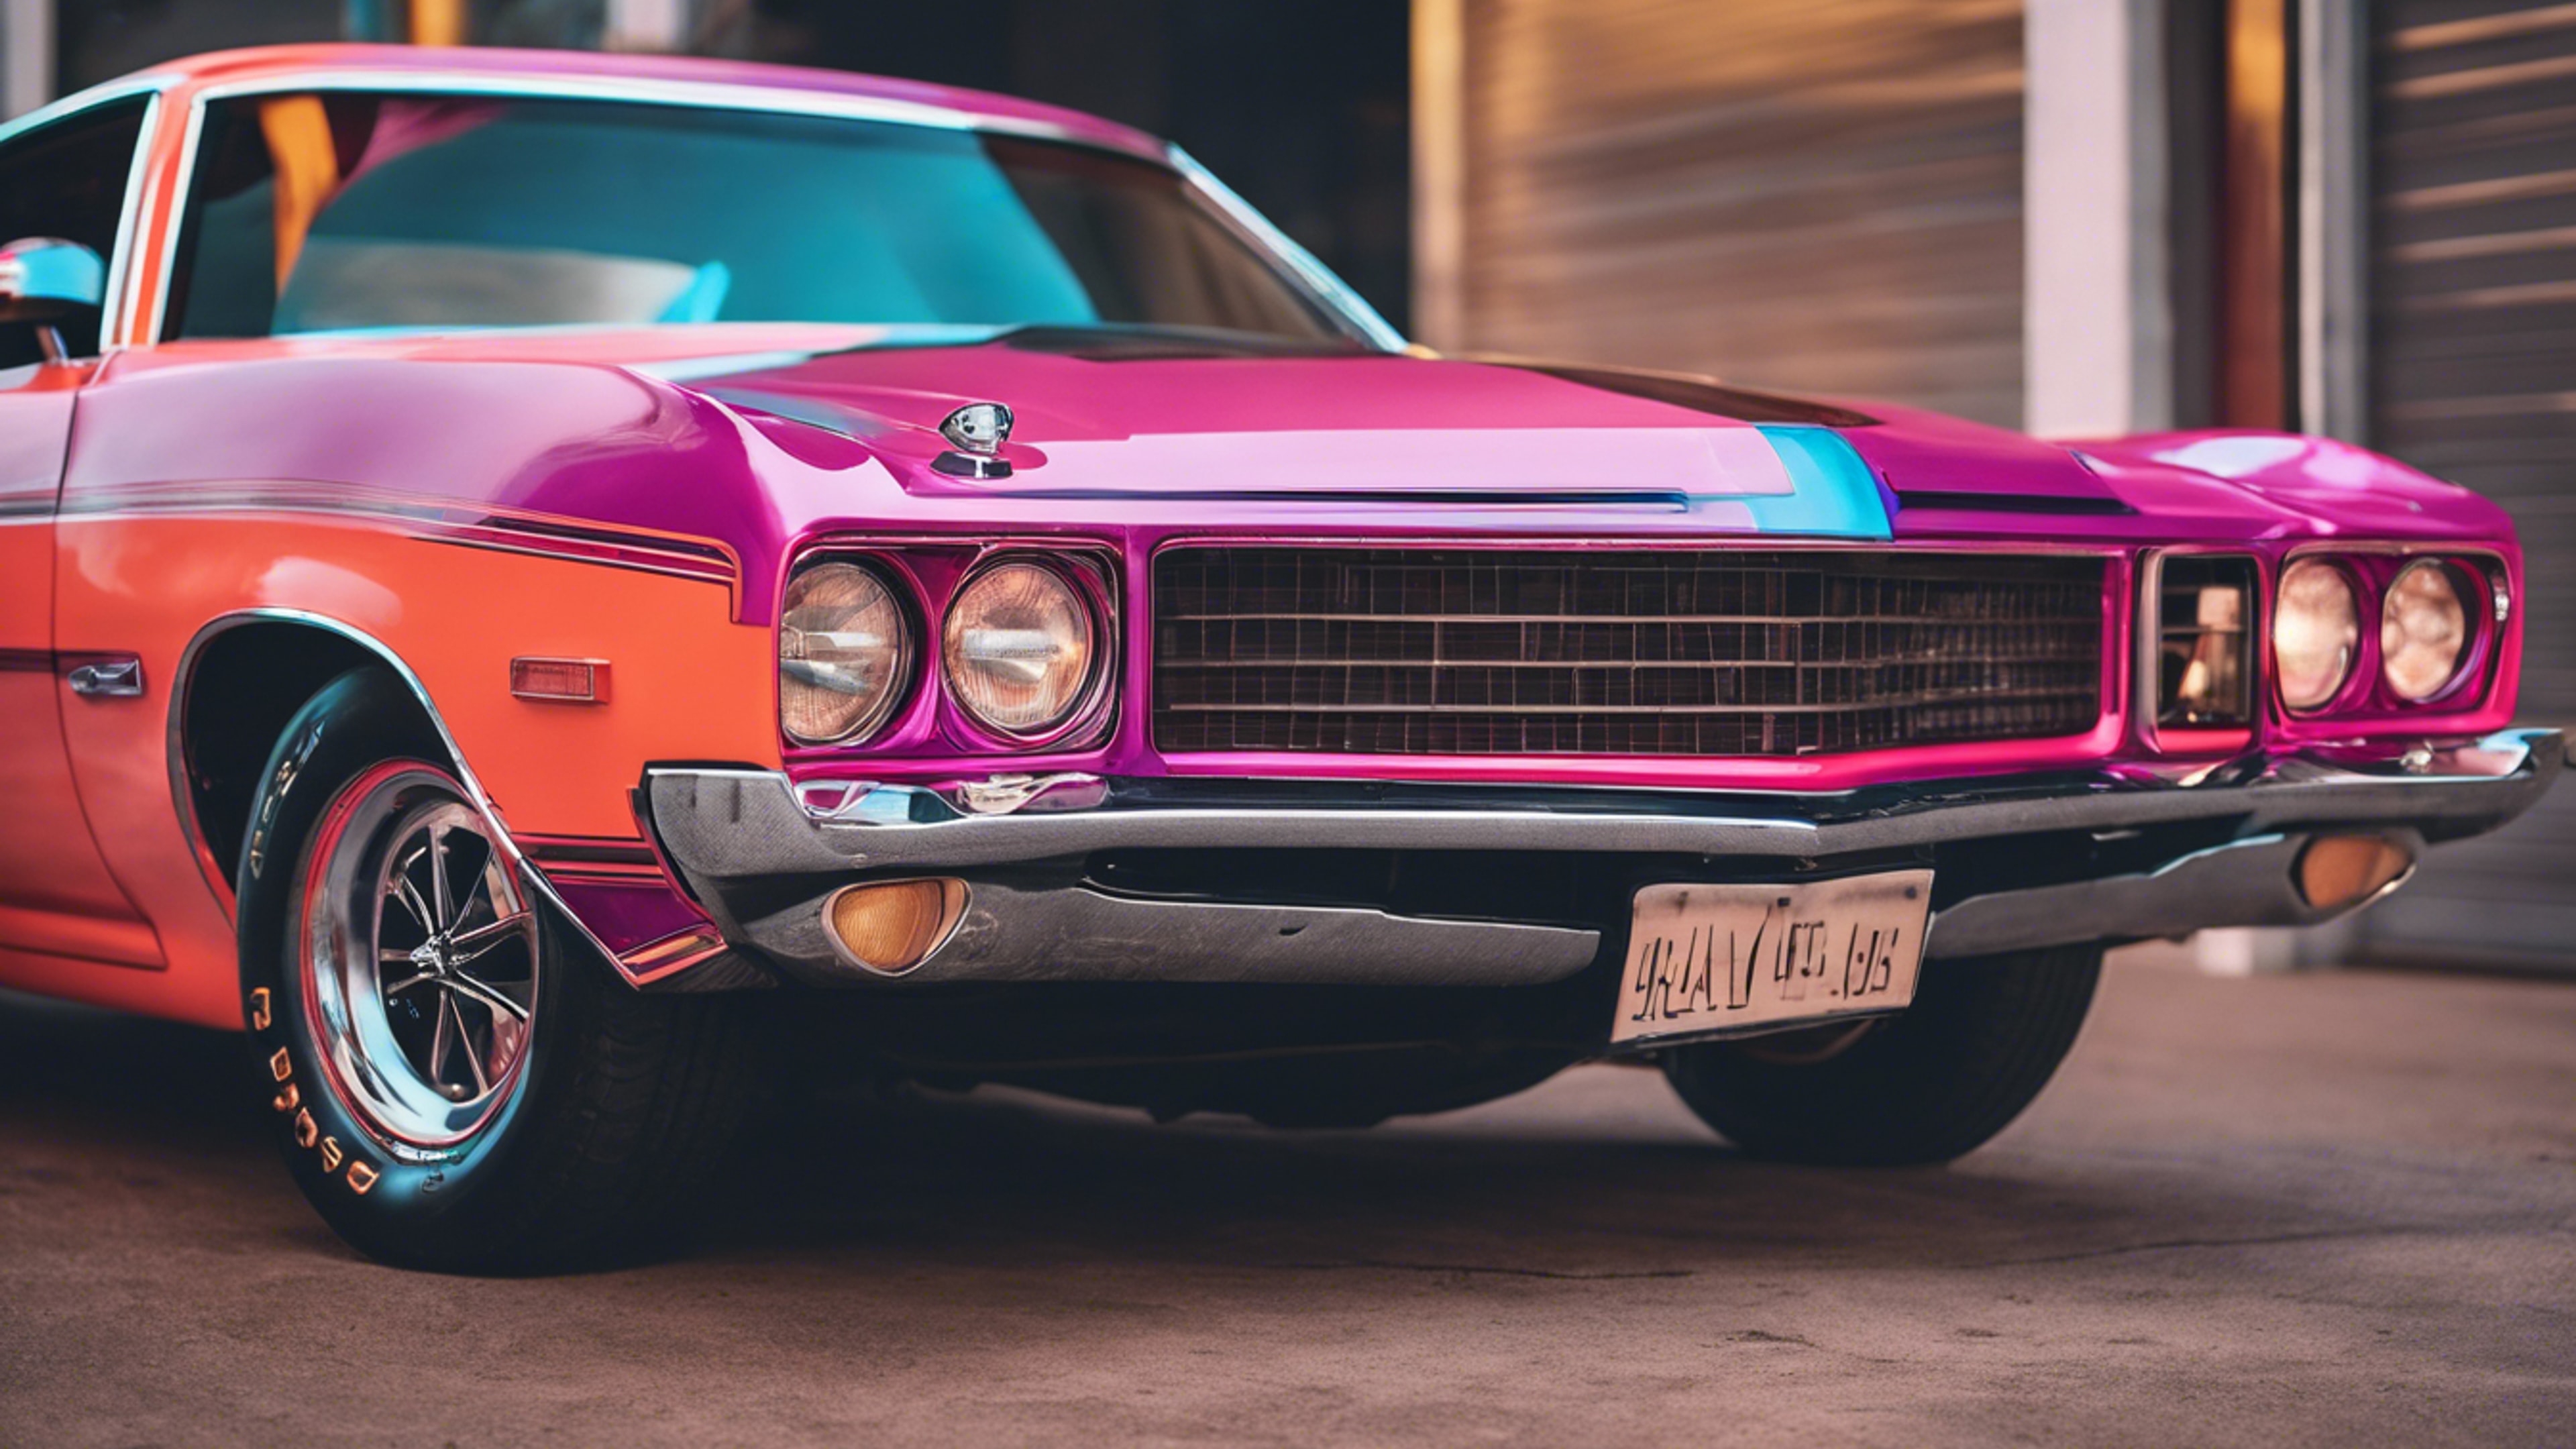 A classic American muscle car from the 1970s, printed in bright neon colors 벽지[fa60d4cf89e348ffade4]